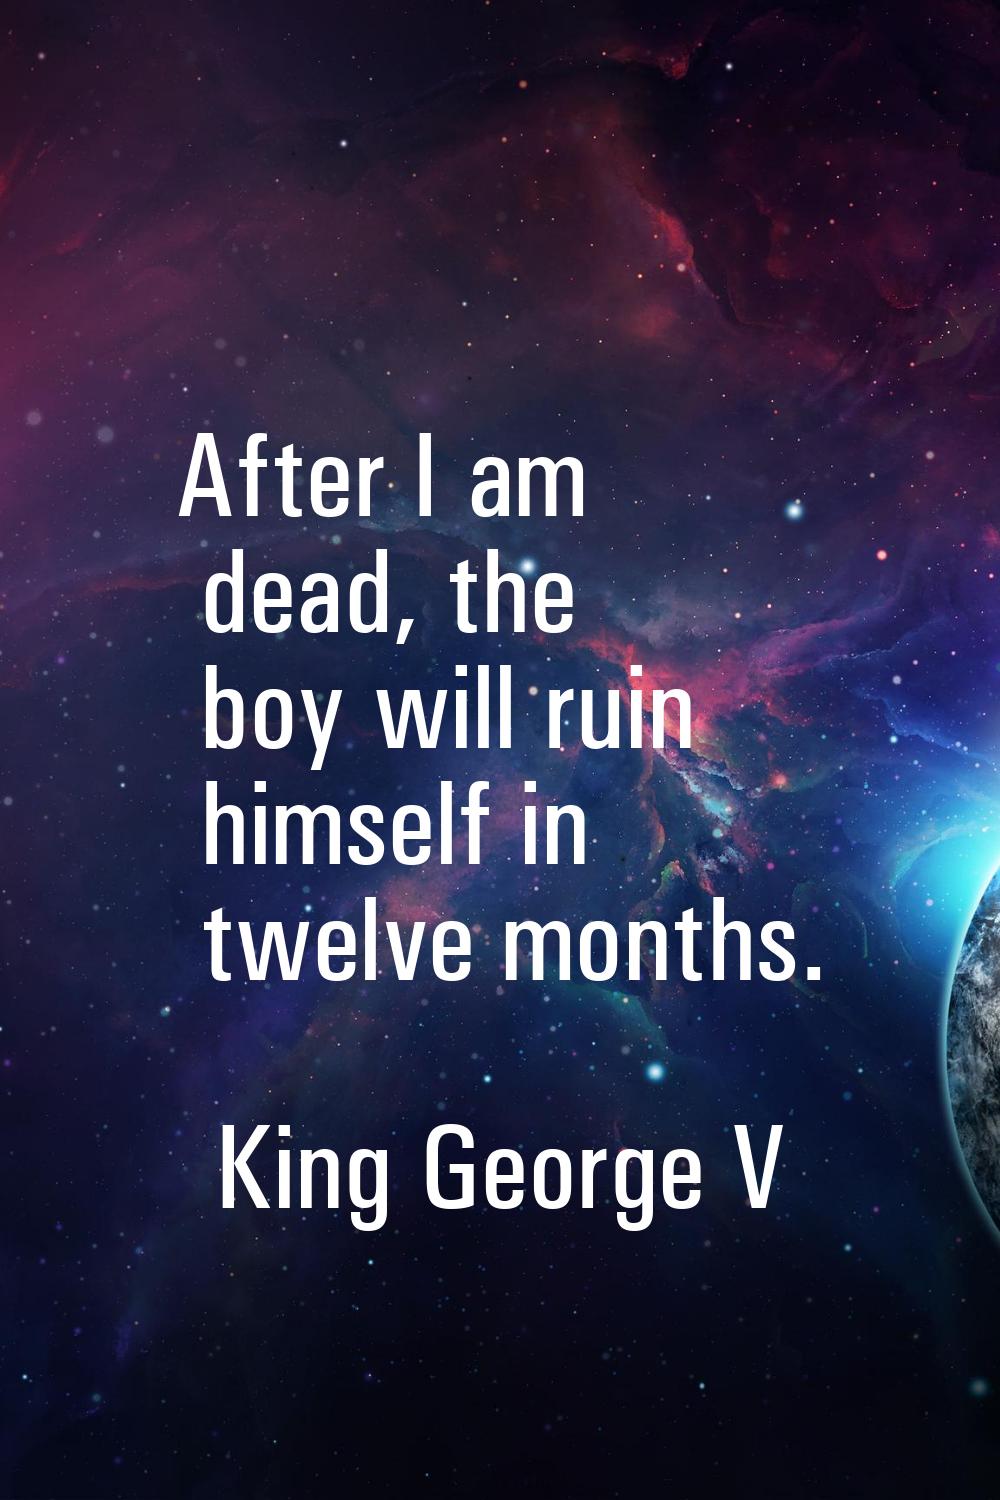 After I am dead, the boy will ruin himself in twelve months.